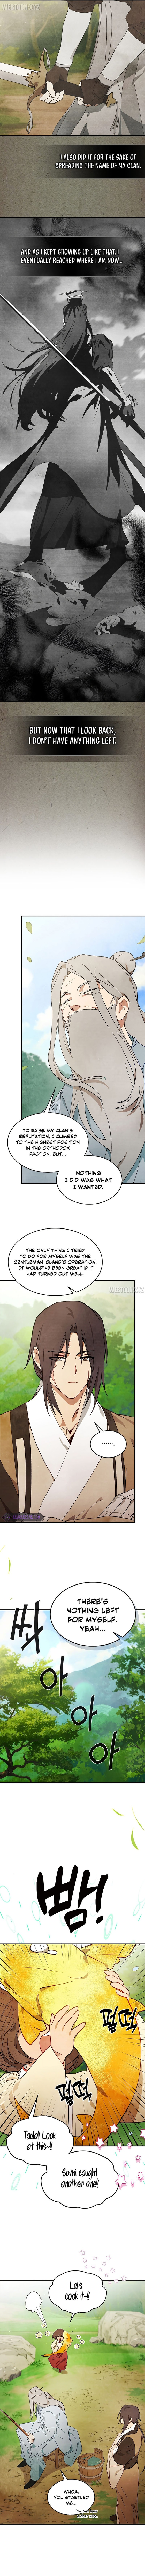 chronicles-of-the-martial-gods-return-chap-43-3